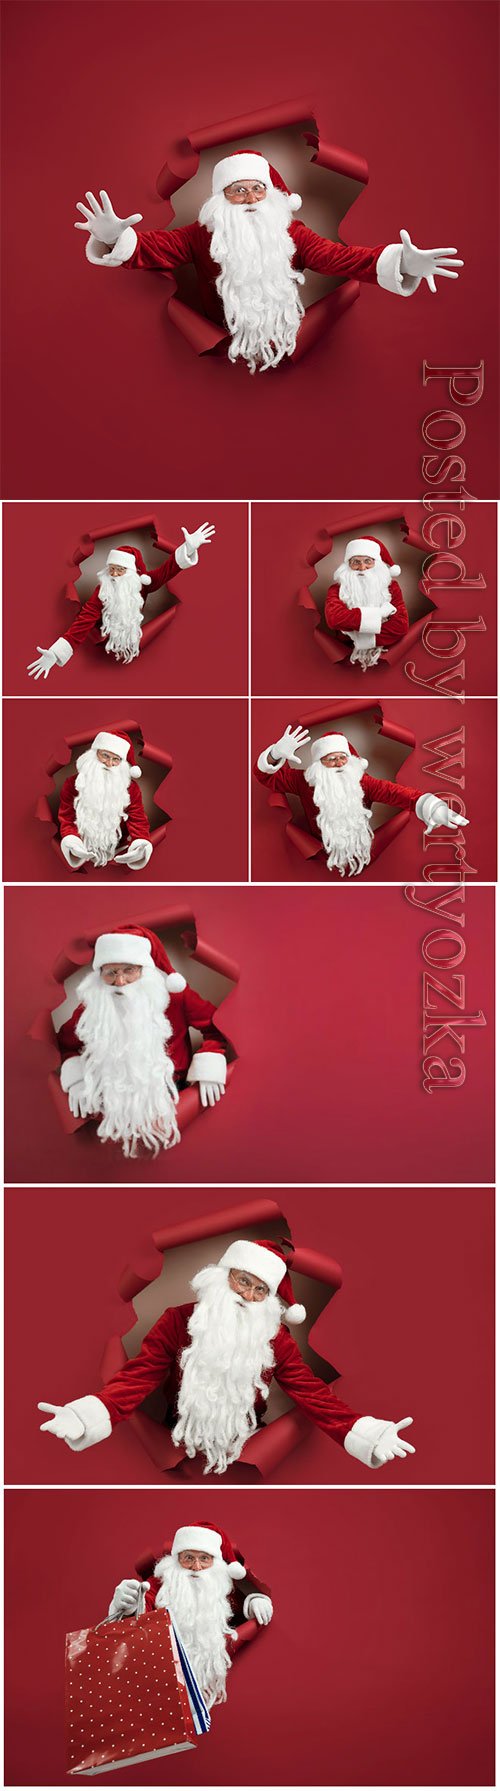 Santa man looking through hole on red paper